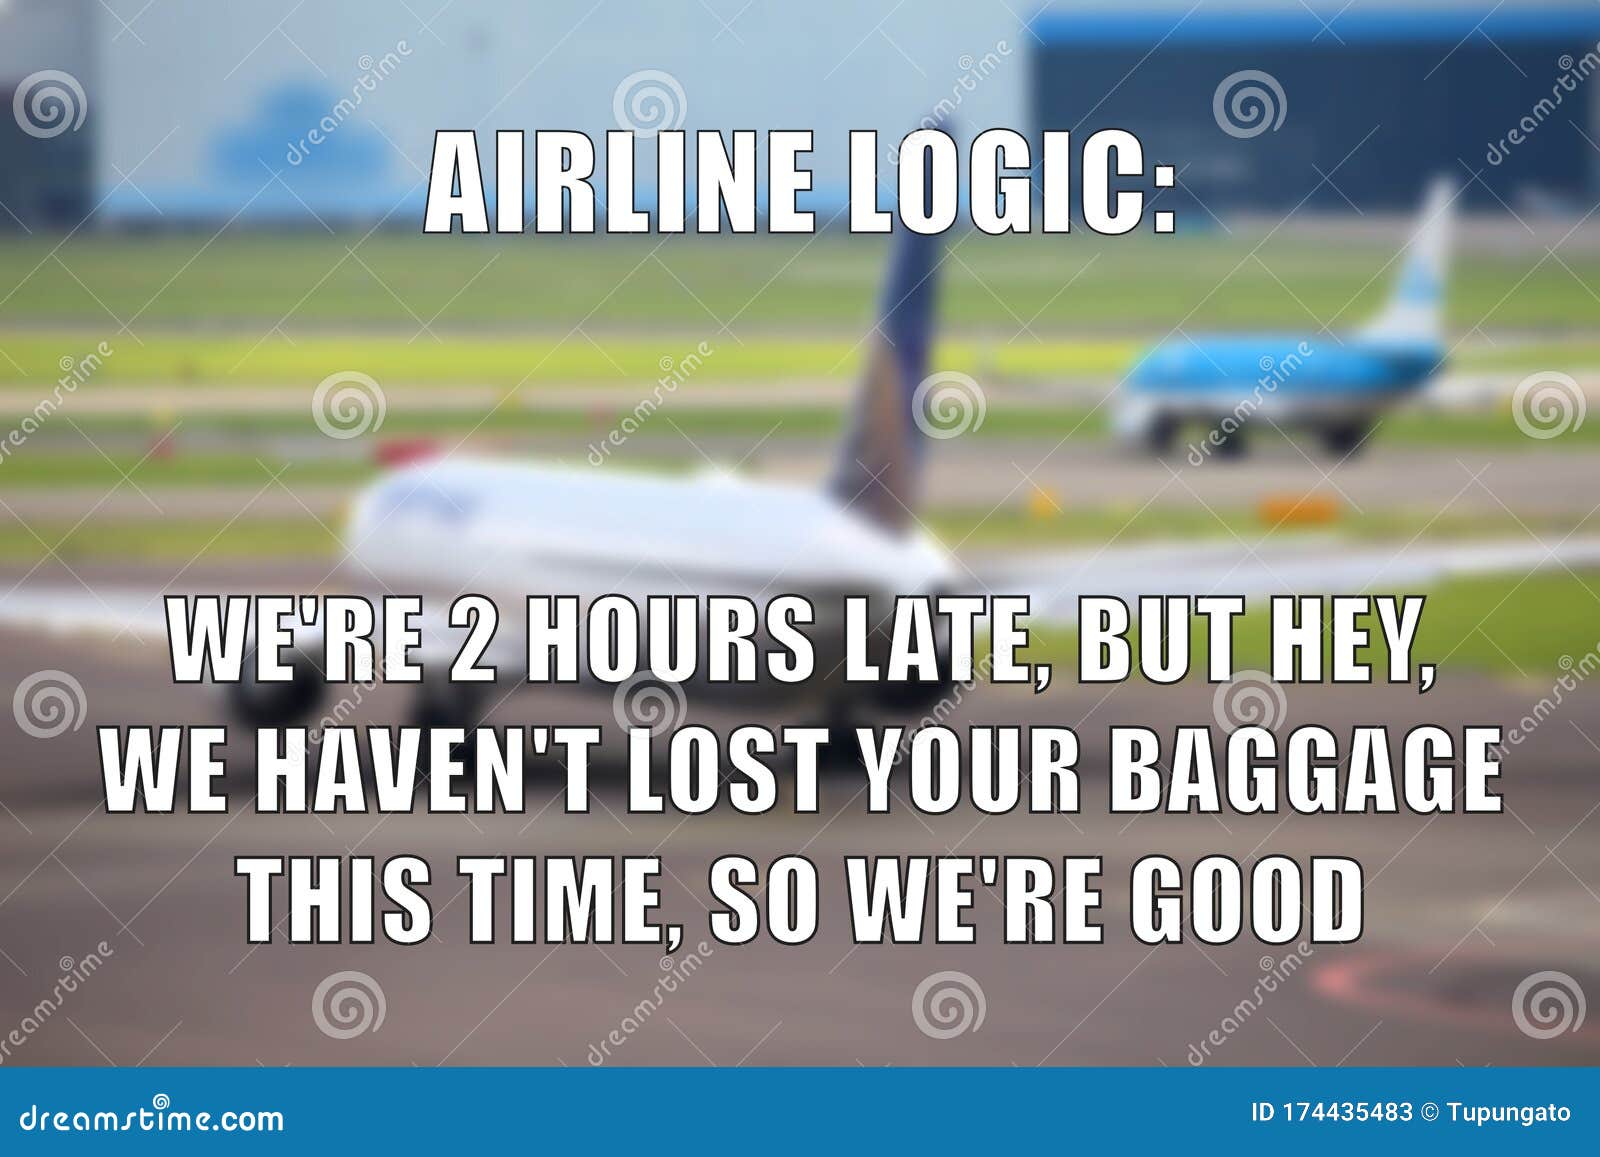 Airline Lost Baggage and Delays Stock Image - Image of meme, humor ...